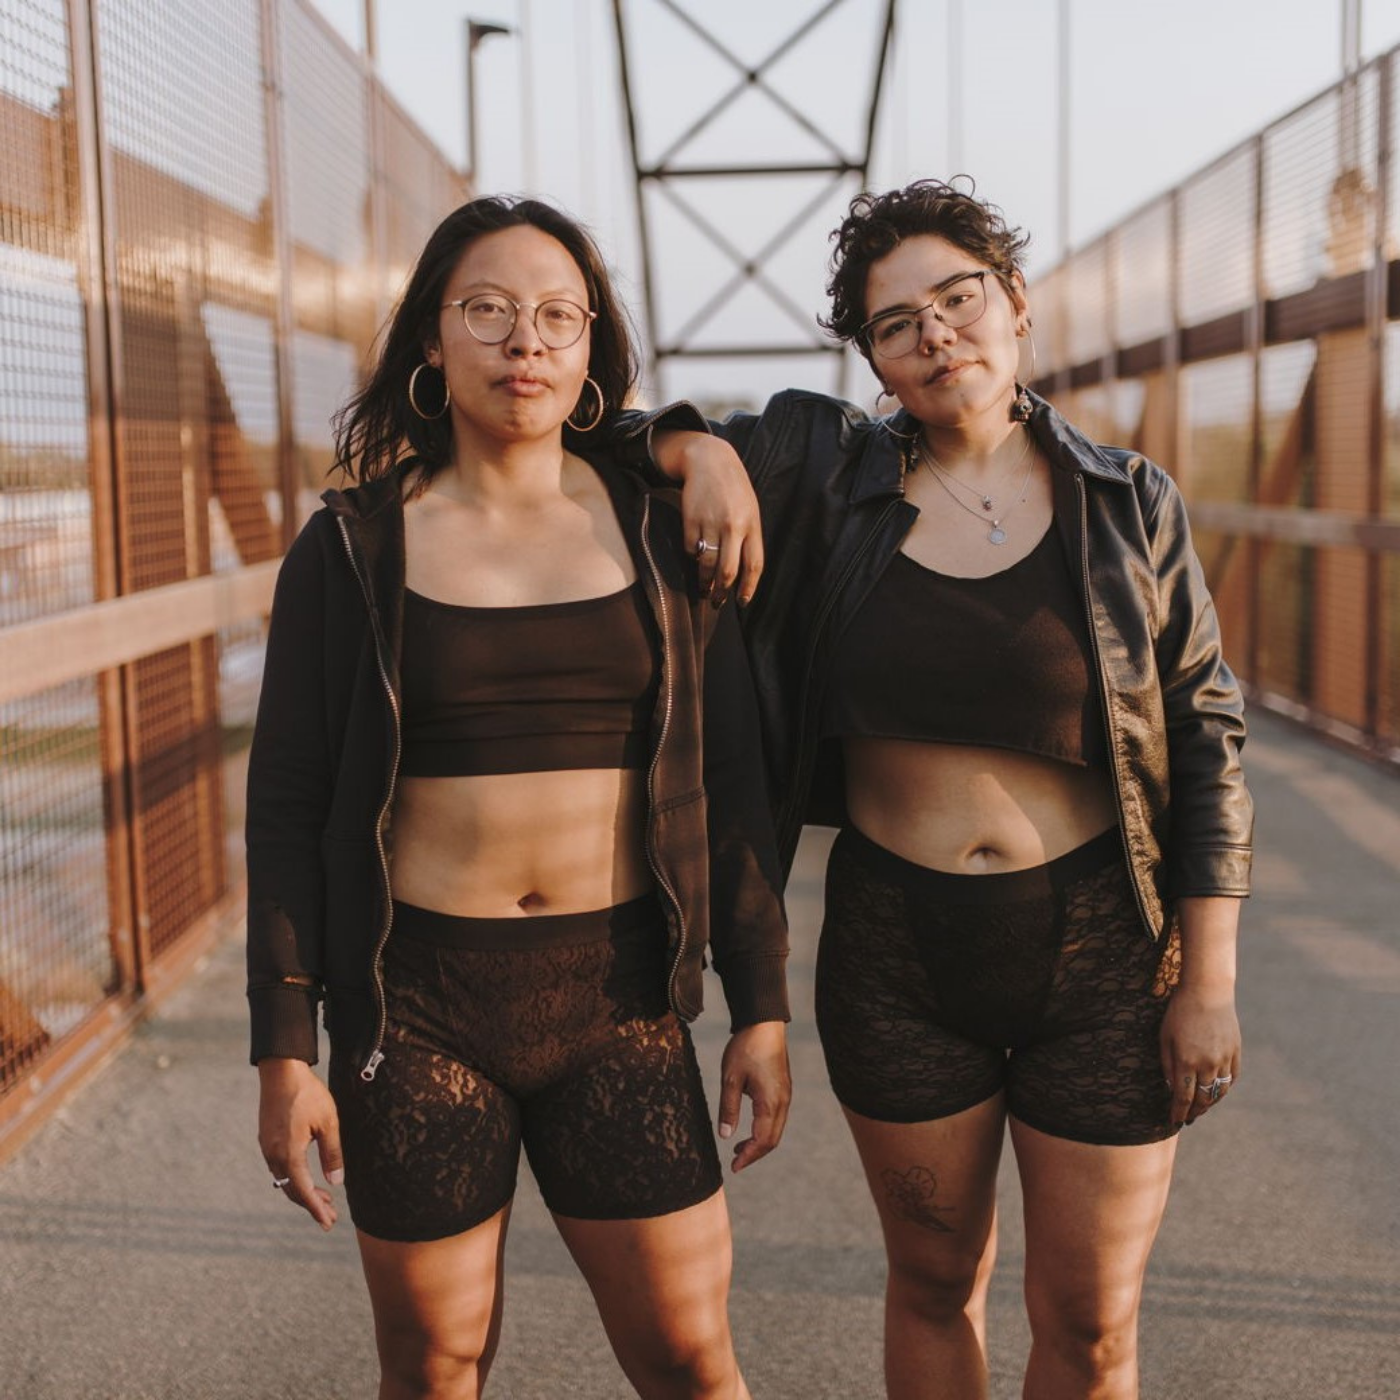 Two models are wearing cropped black tank tops and black lace boxer briefs. The model on the left is wearing a black hoodie and the model on the right is wearing a cropped black leather jacket. They are standing on a concrete bridge with metal sides.